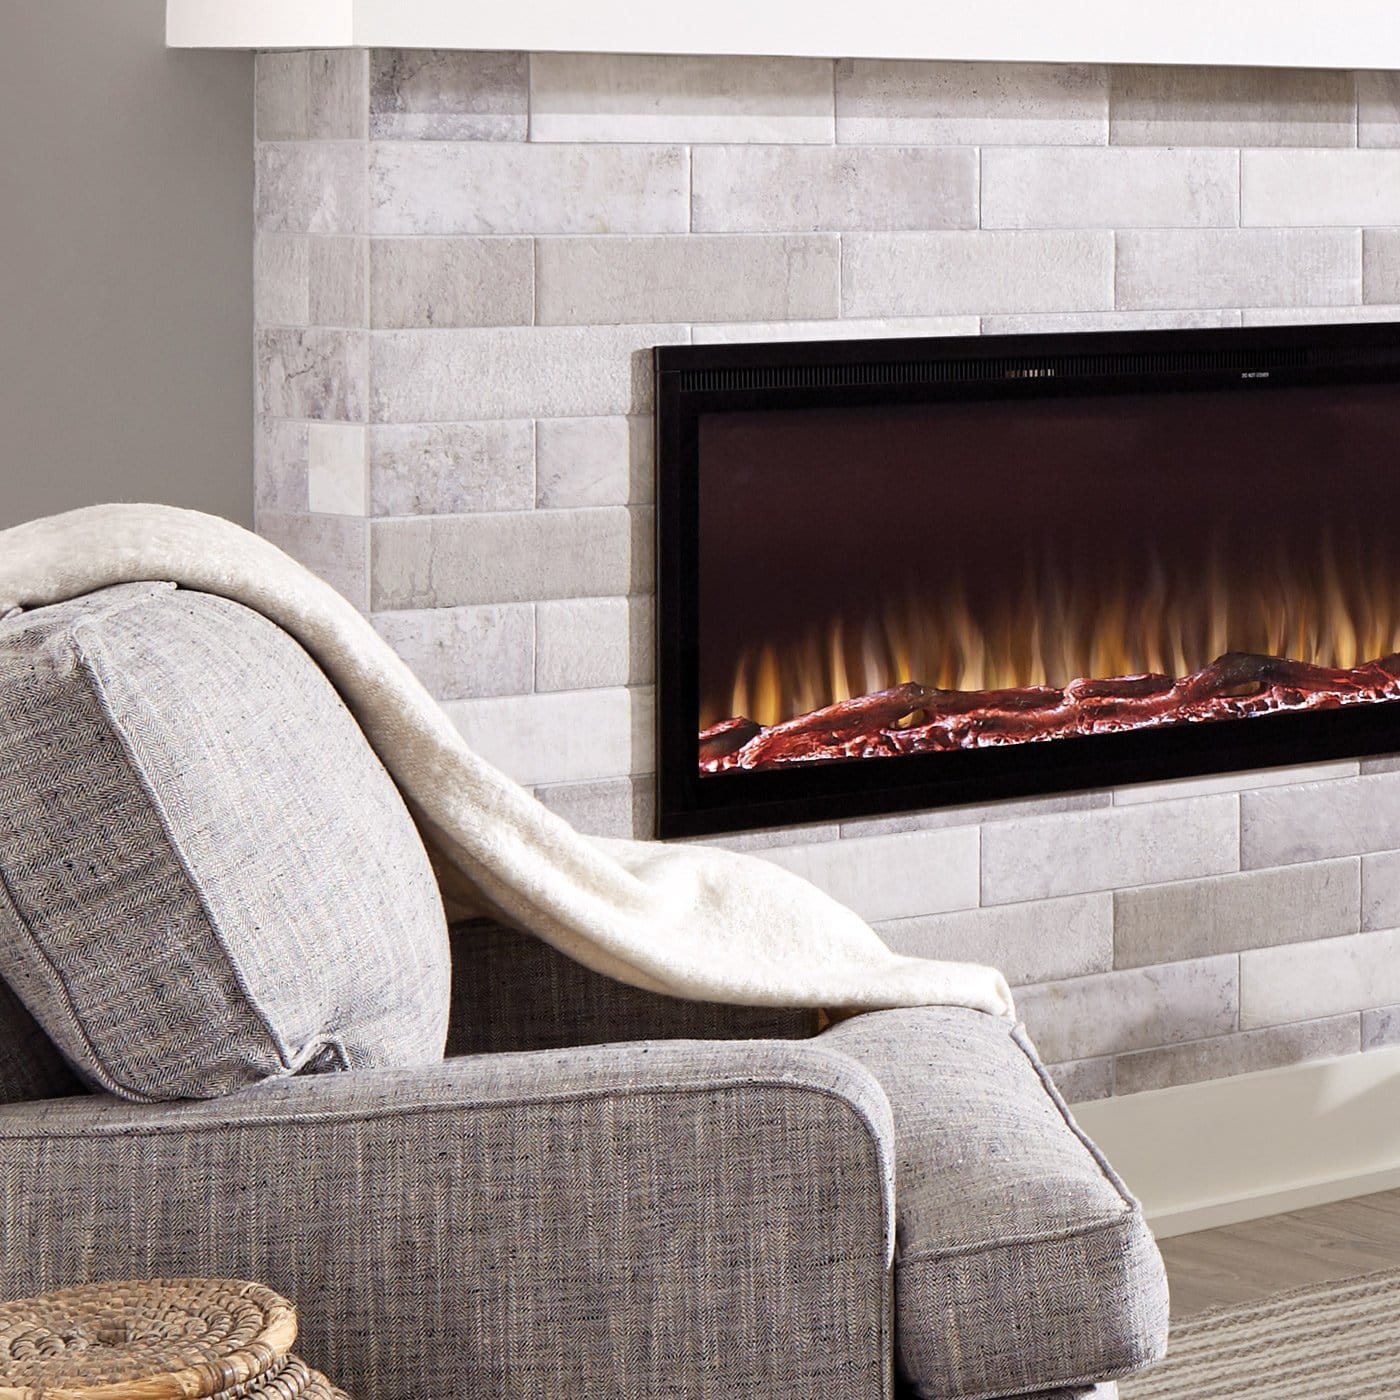 	Sideline Elite Smart 80042 42 WiFi-Enabled Recessed Electric Fireplace on a brick wall.